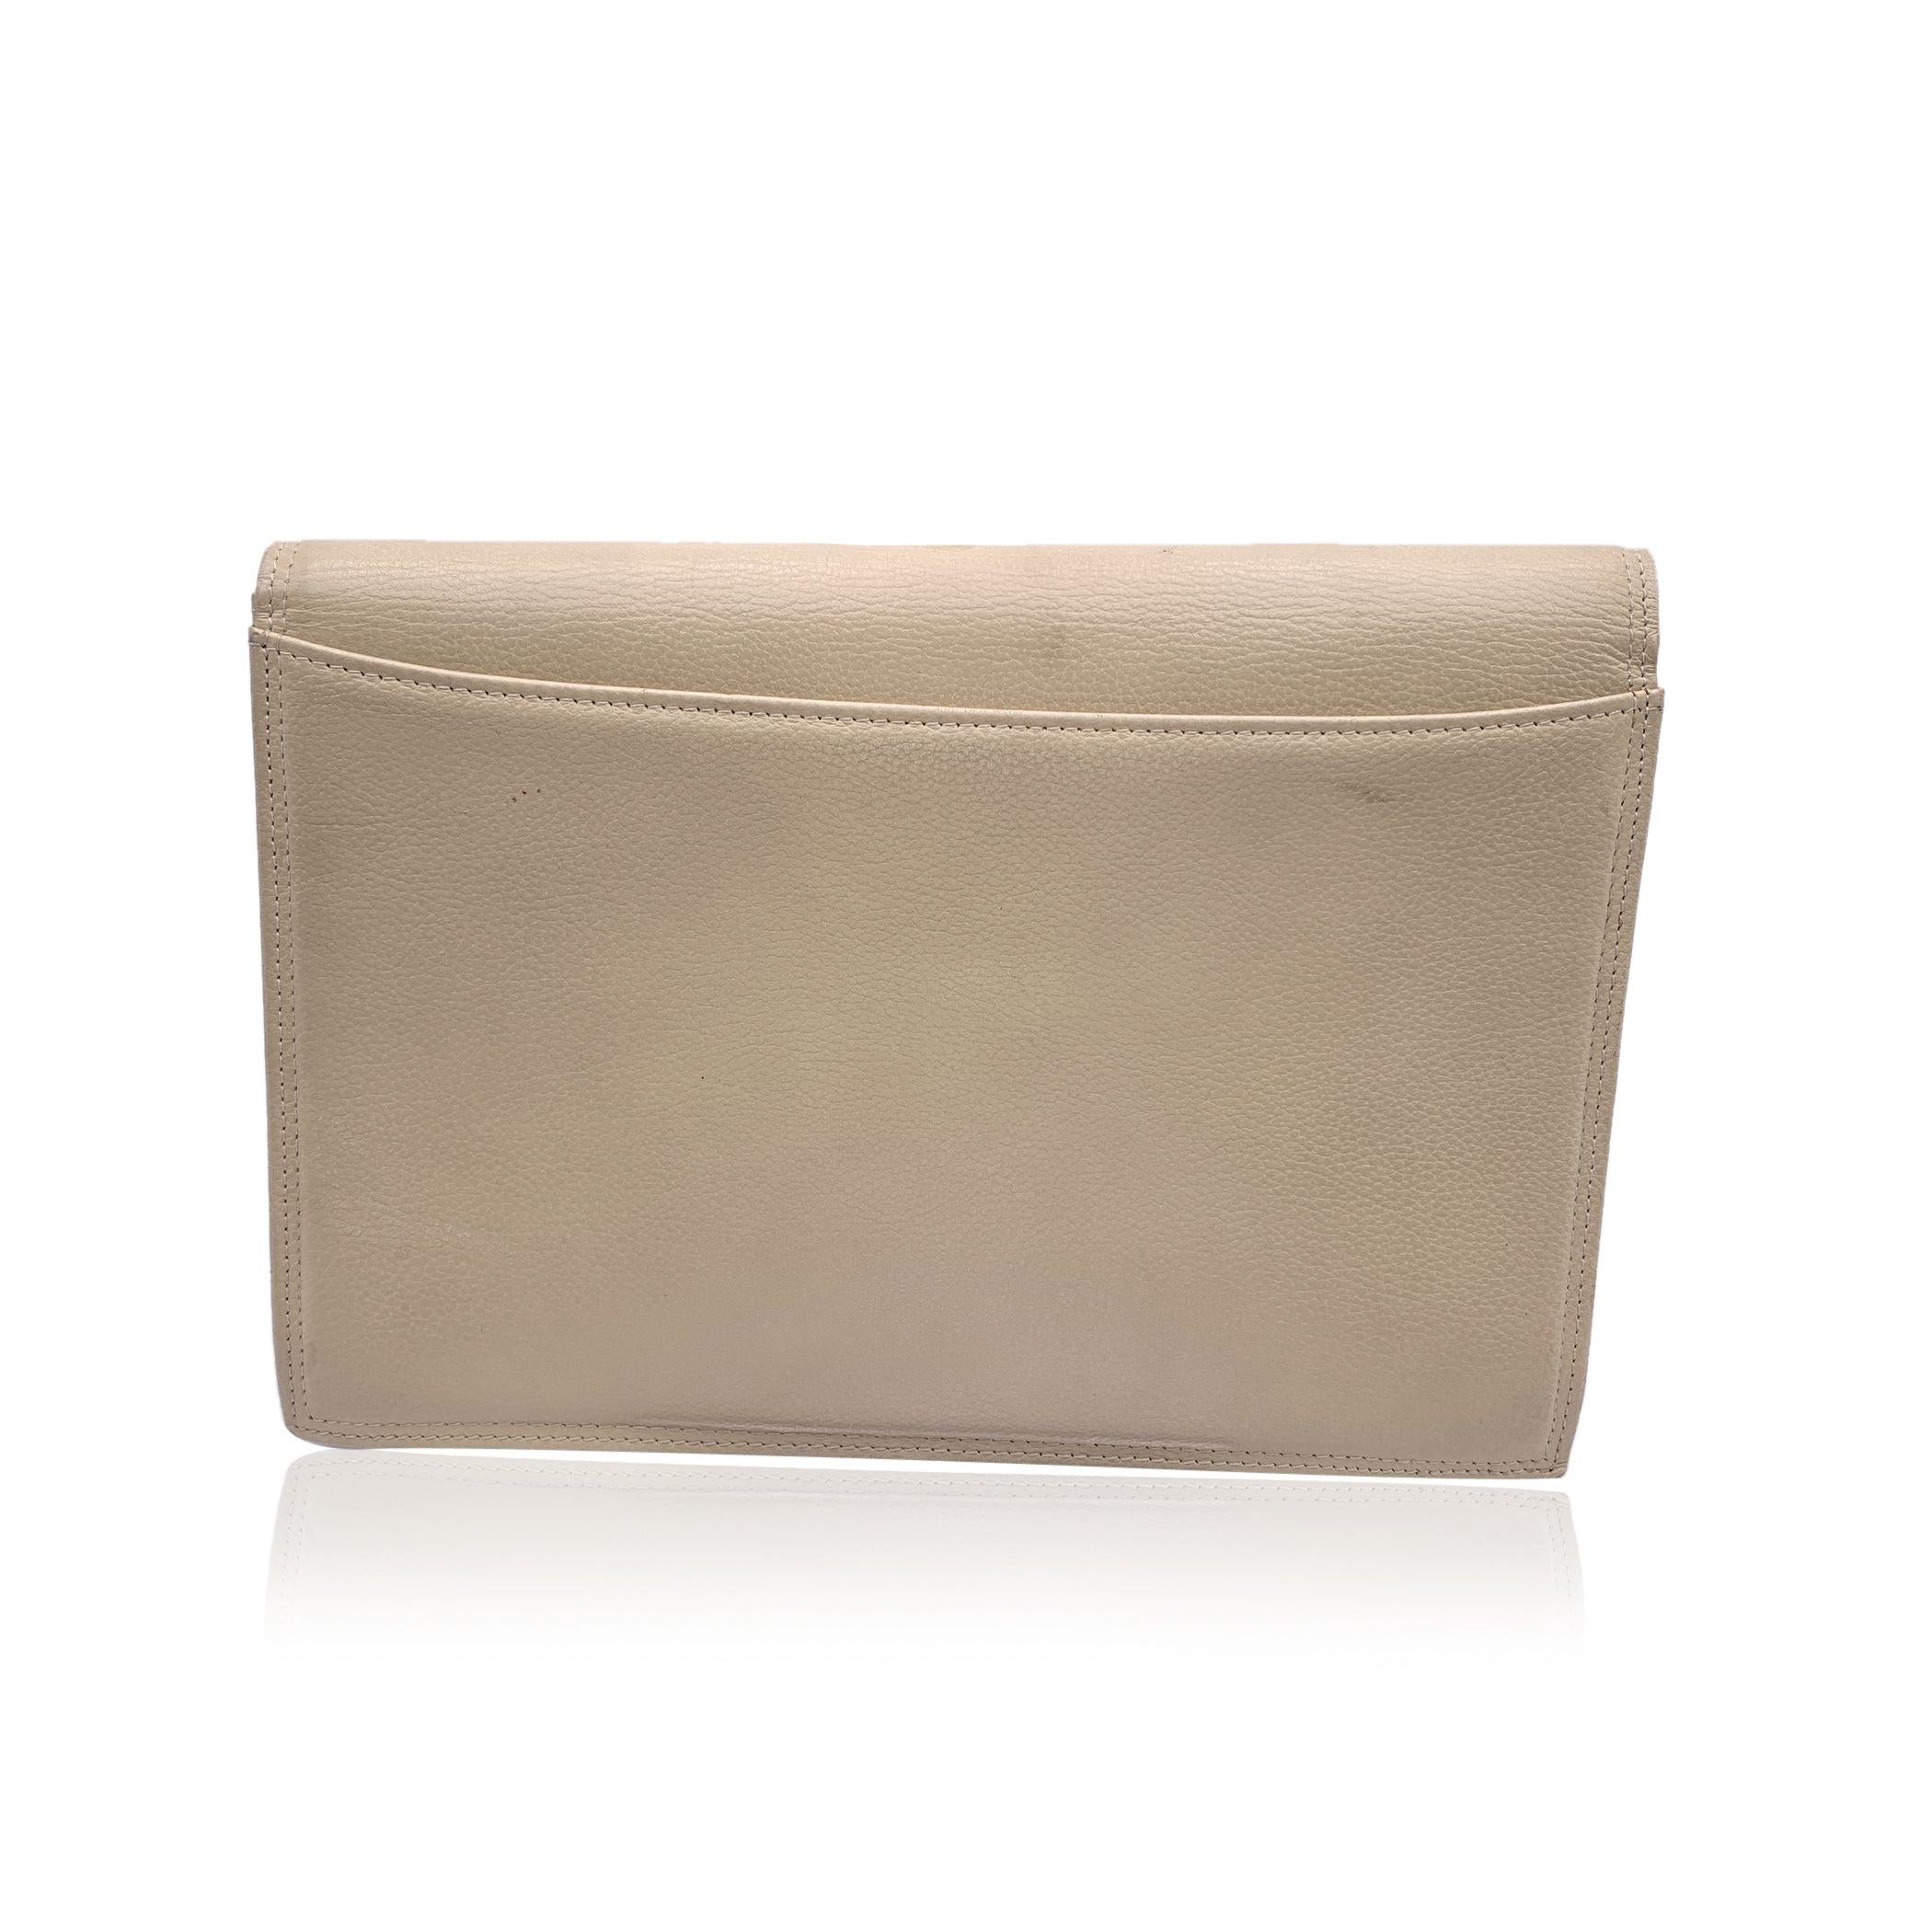 Yves Saint Laurent Vintage Beige Leather Clutch Bag Handbag In Excellent Condition For Sale In Rome, Rome